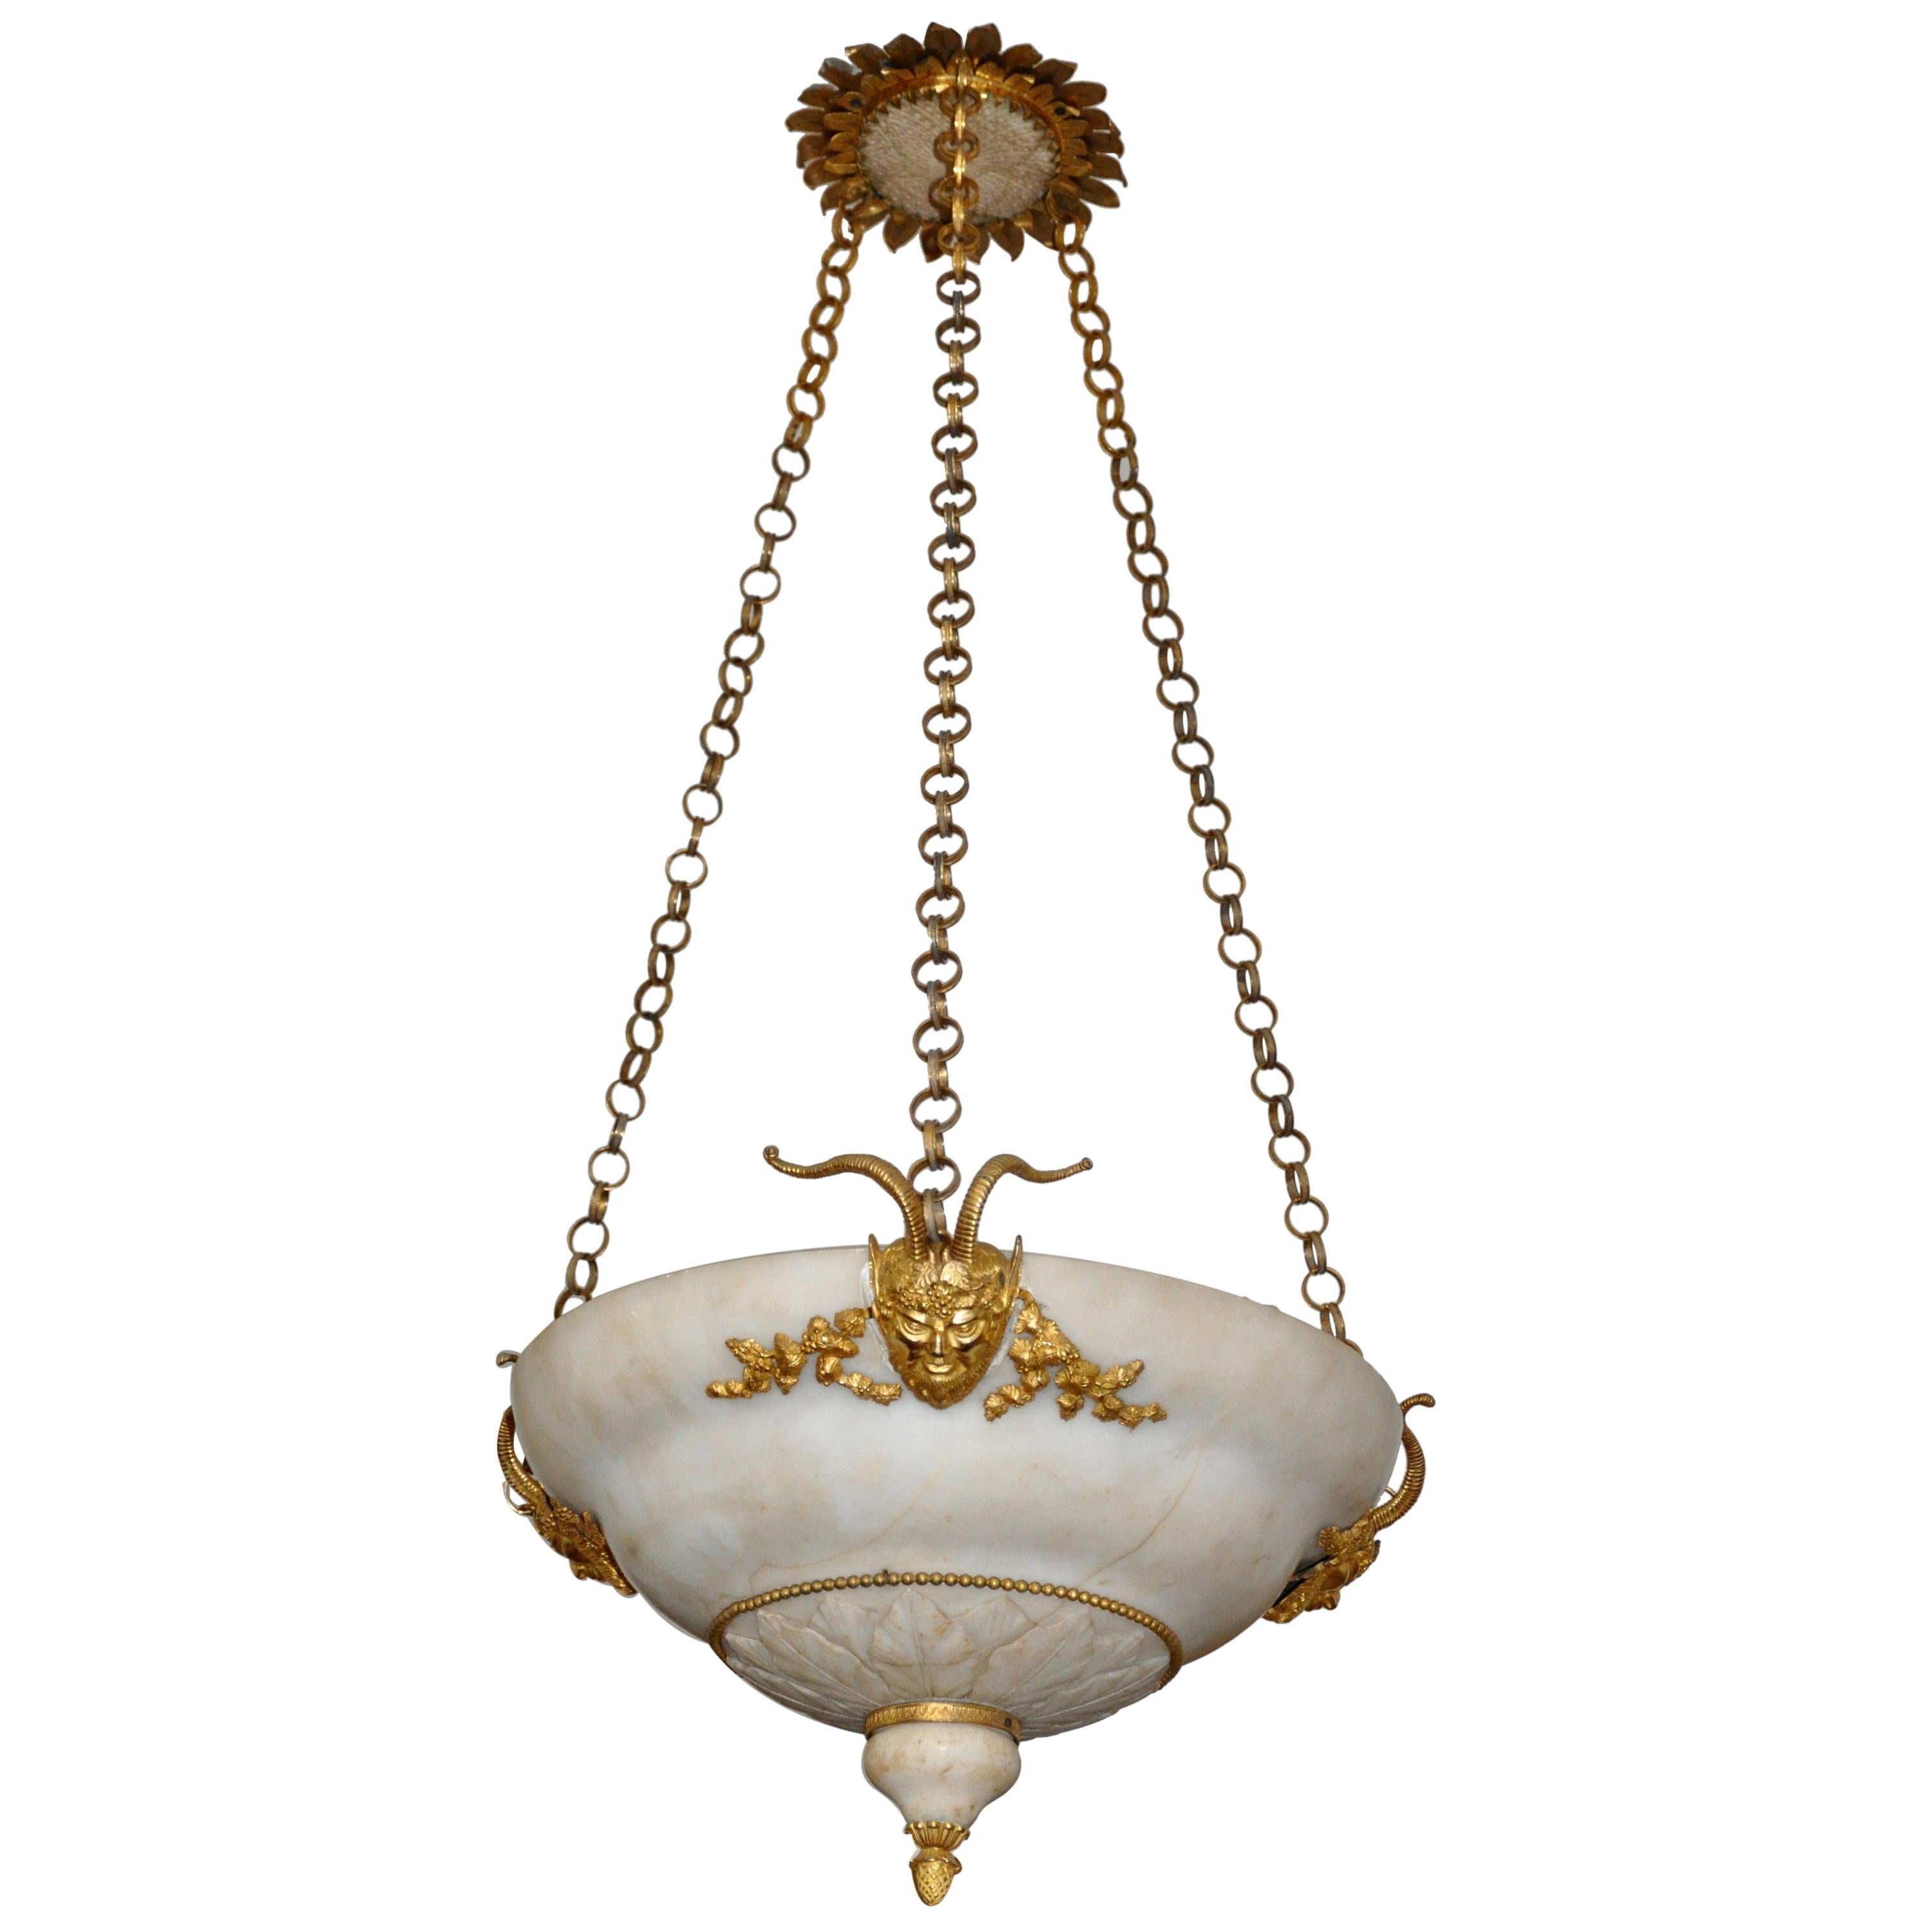 Early 19th Century Swedish Neoclassical Alabaster and Ormolu Chandelier